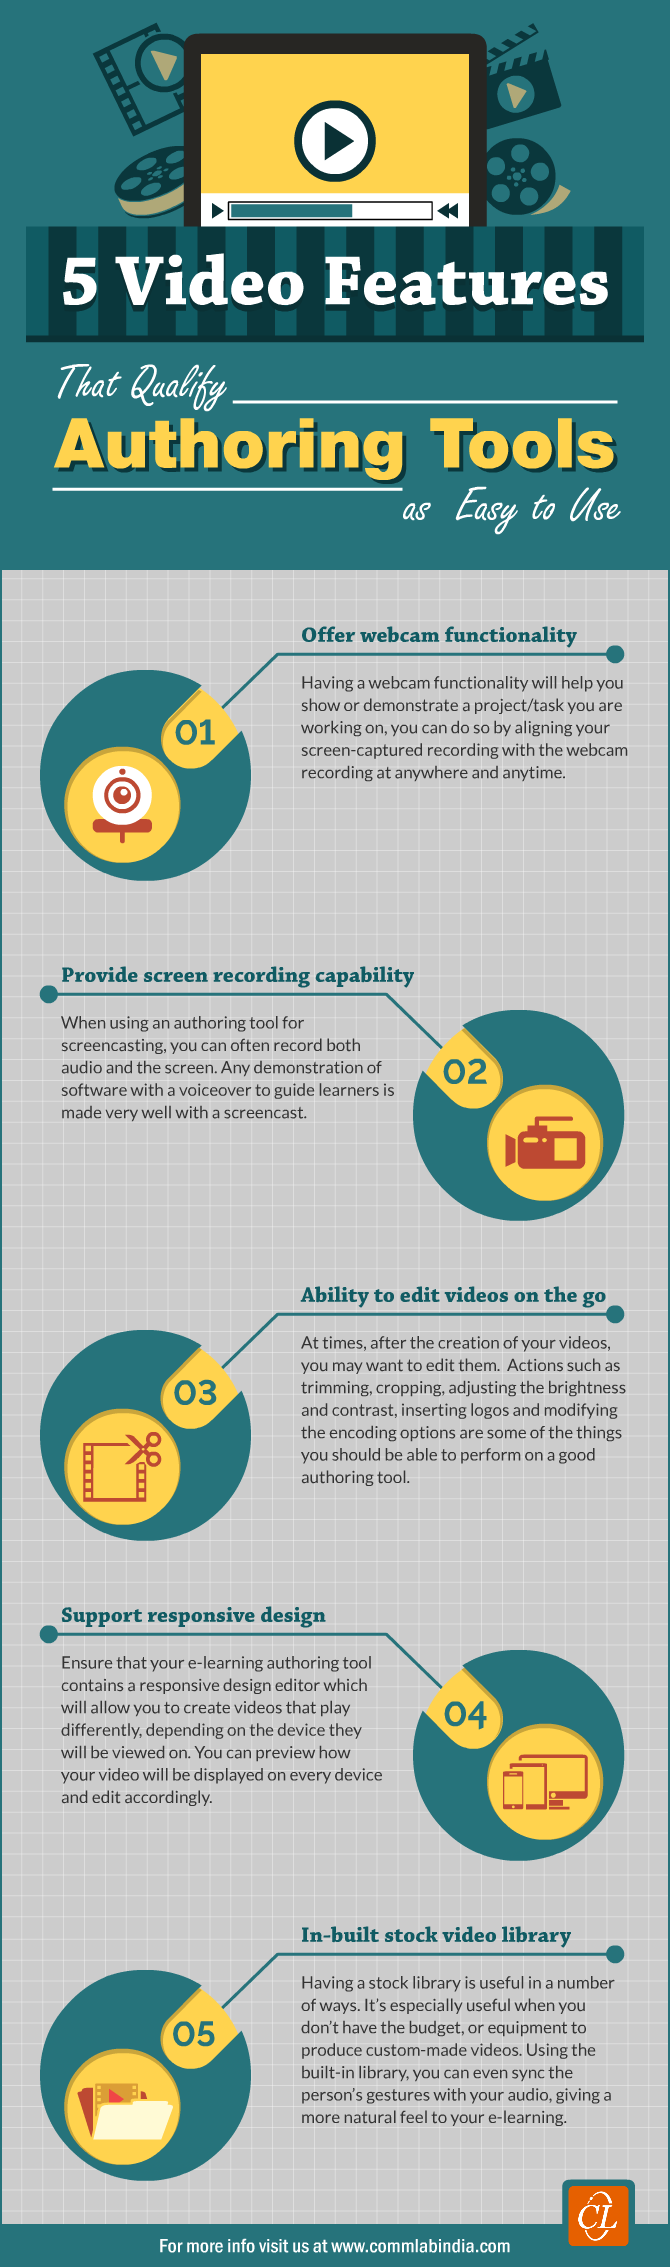 5 Video Features that Qualify Authoring Tools as Easy to Use [Infographic]